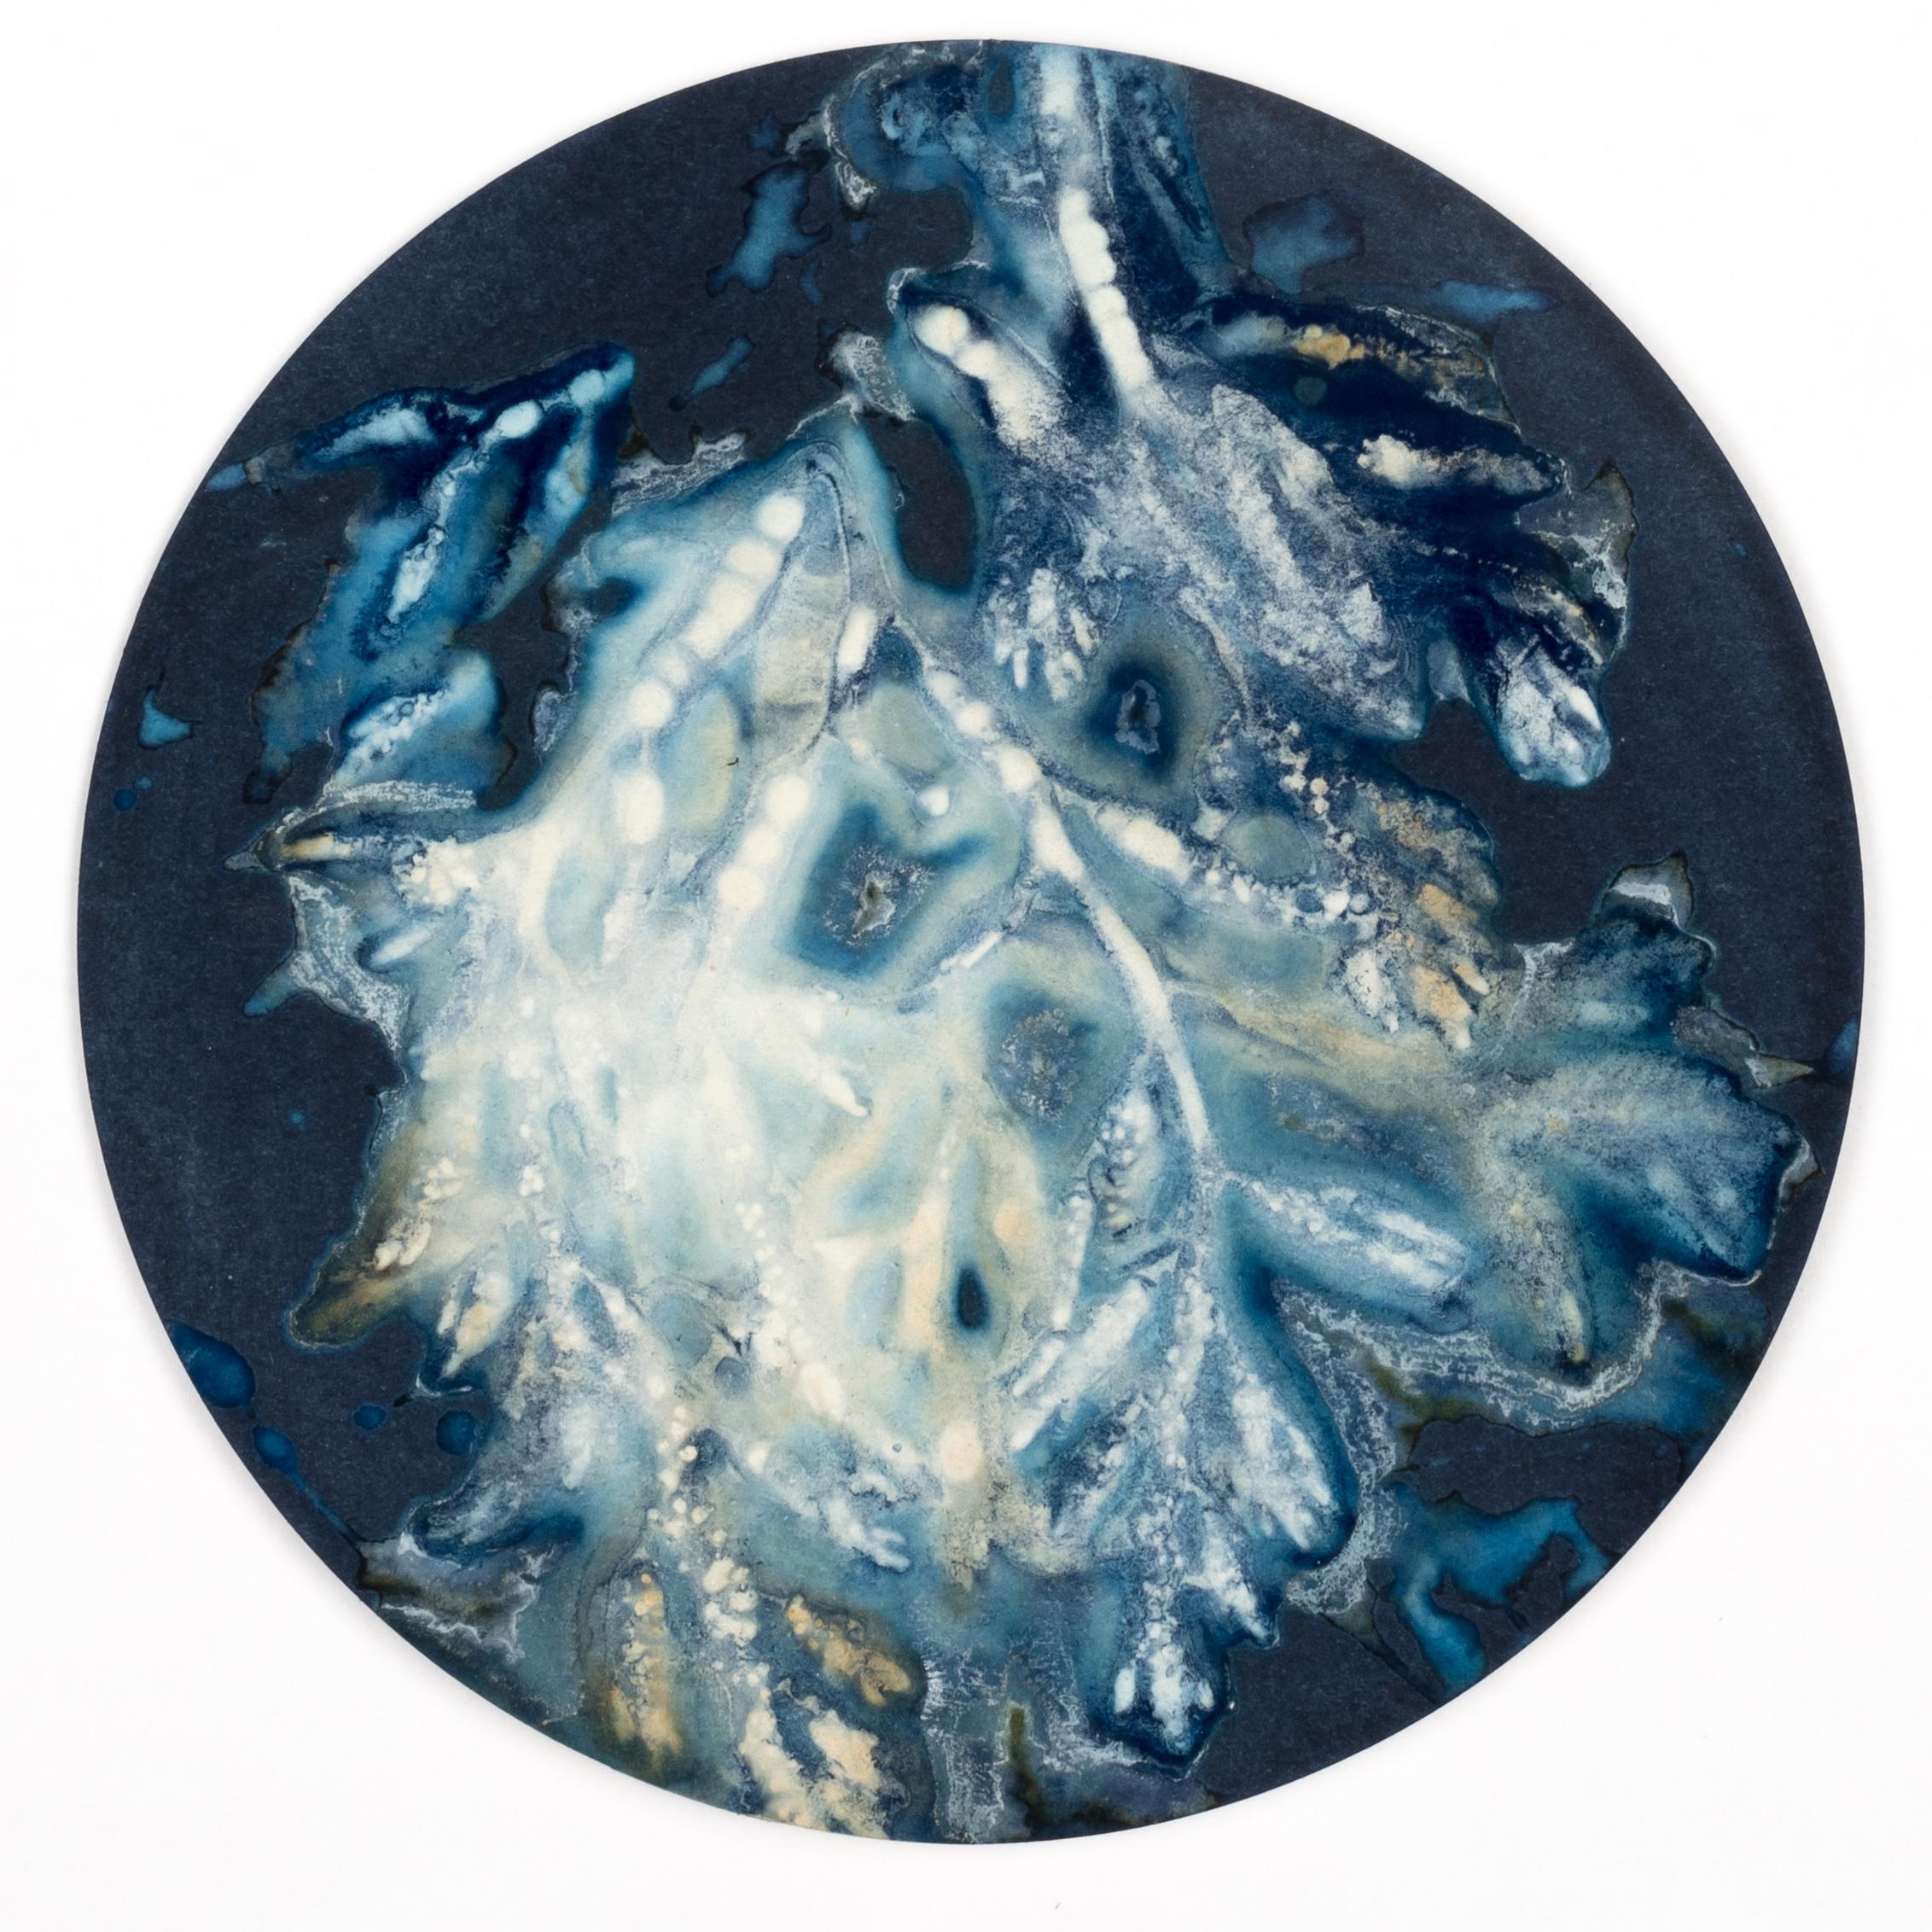 Algas 88, 28, 87. Cyanotype photograhs mounted in high resistance glass dish For Sale 1